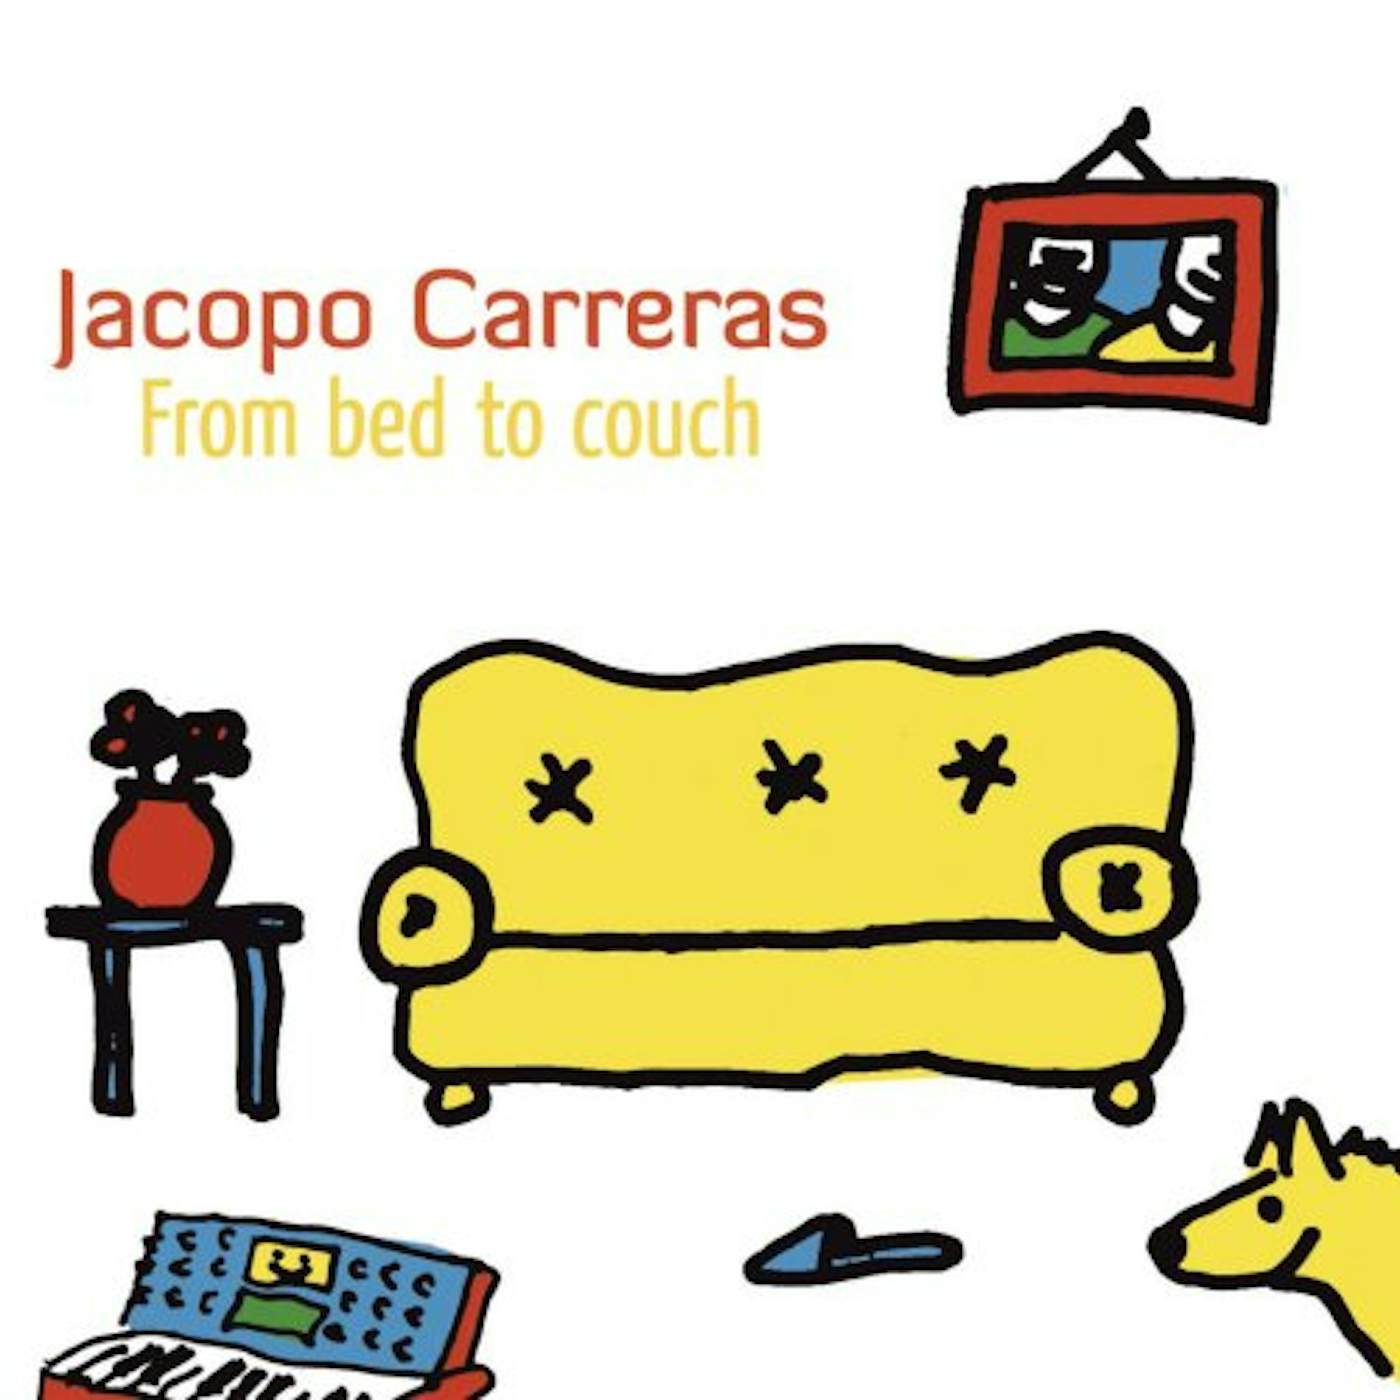 Jacopo Carreras FROM BED TO COUCH CD